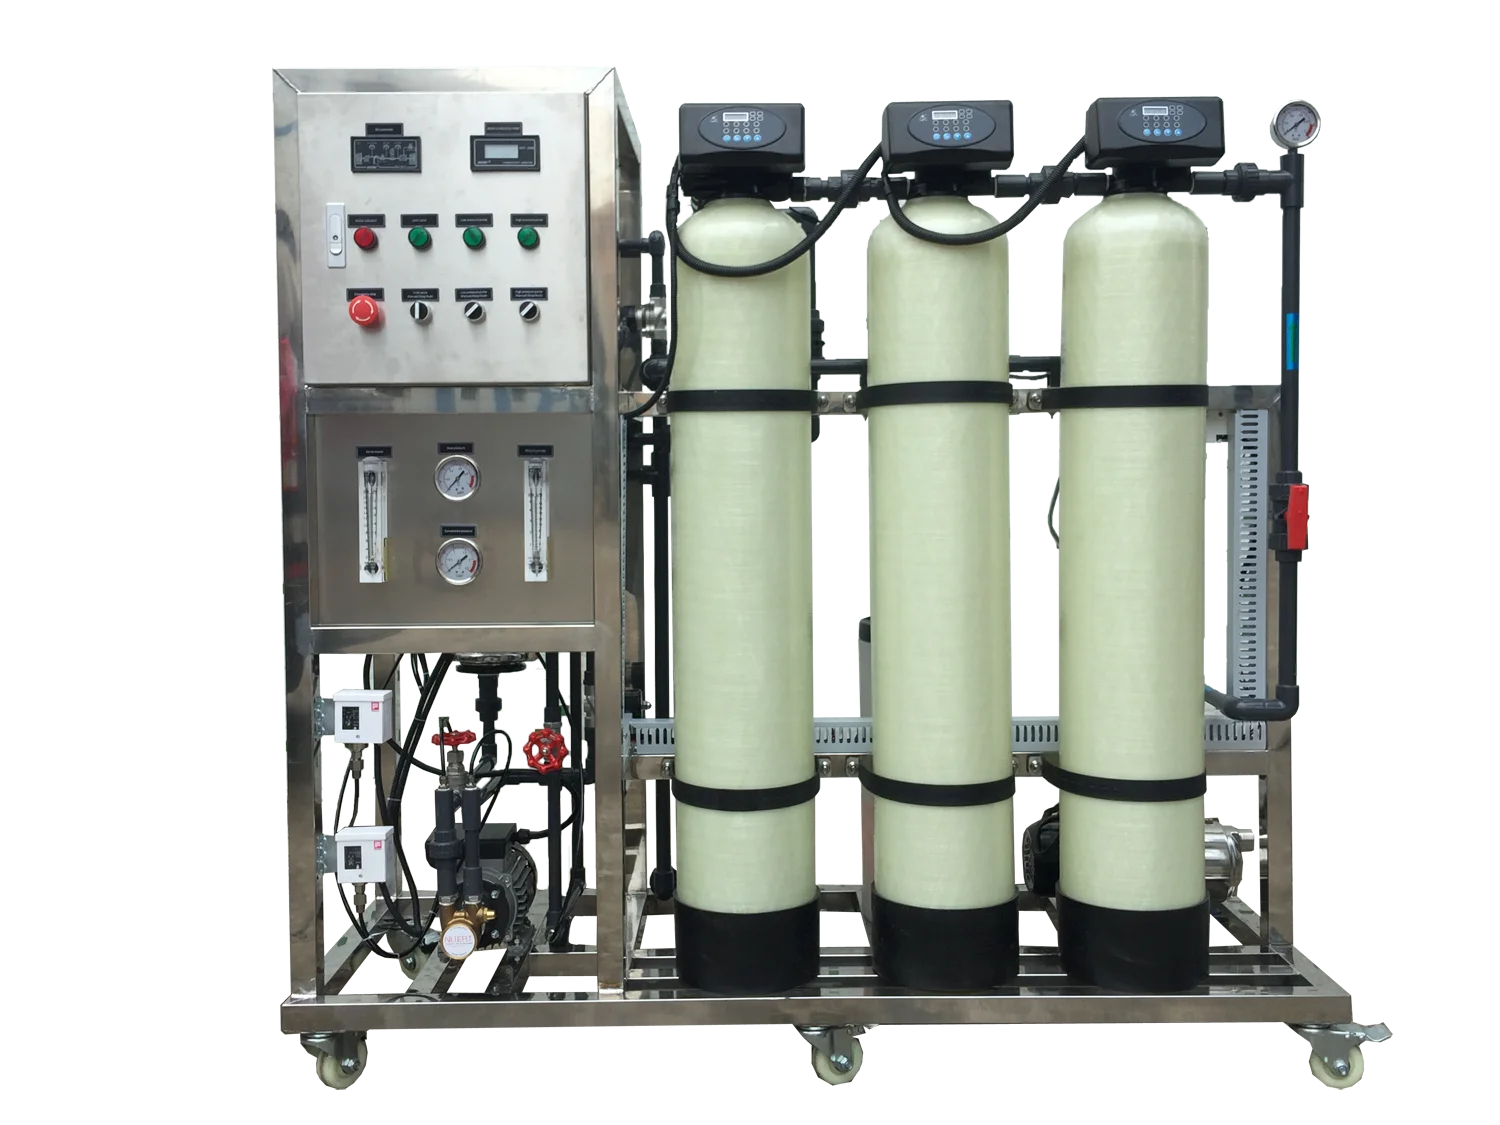 Reverse Osmosis Purification Purifiers Purifying Ro System Plant Purificador De Agua Used Industrial Equipment For Well Water